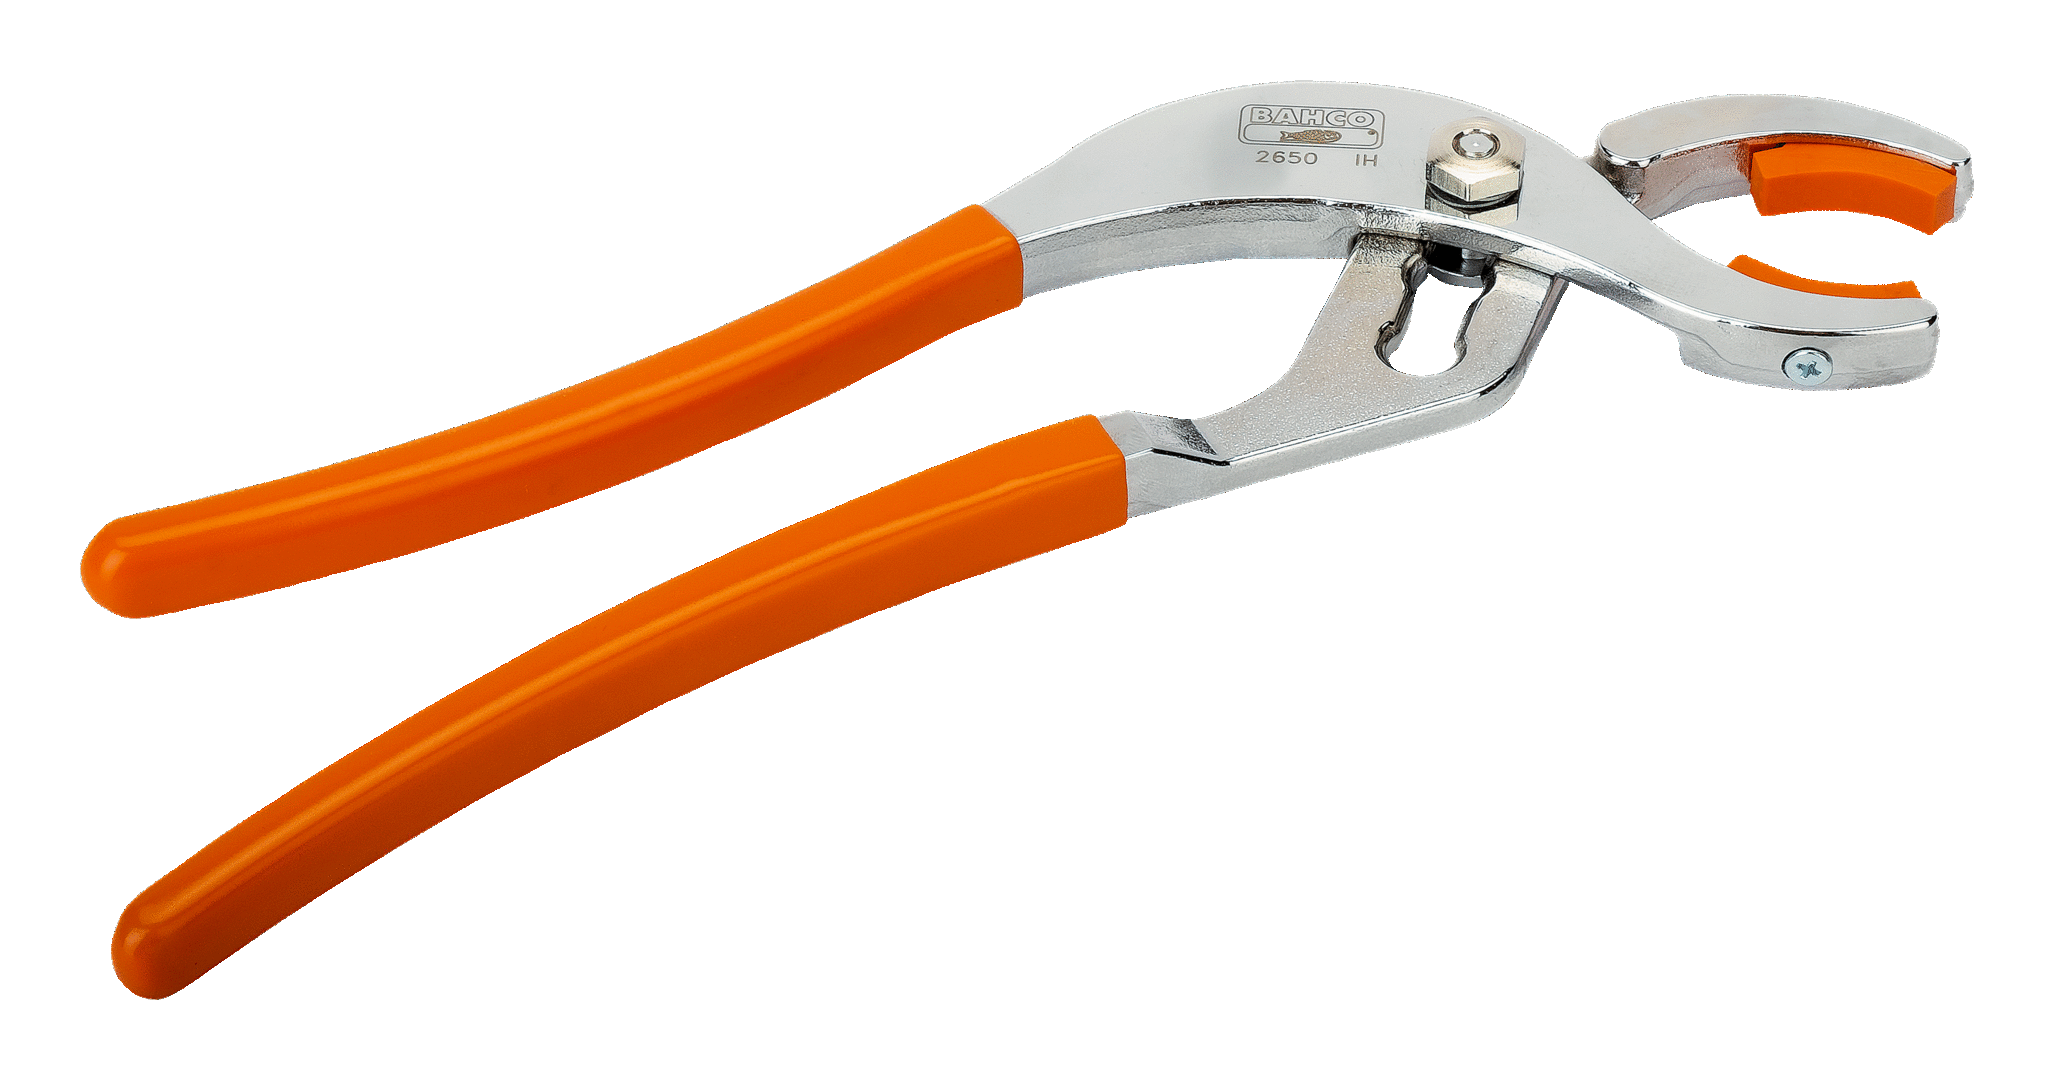 Bahco 5223 DC Slip Joint Pliers Silver/Orange 190 mm